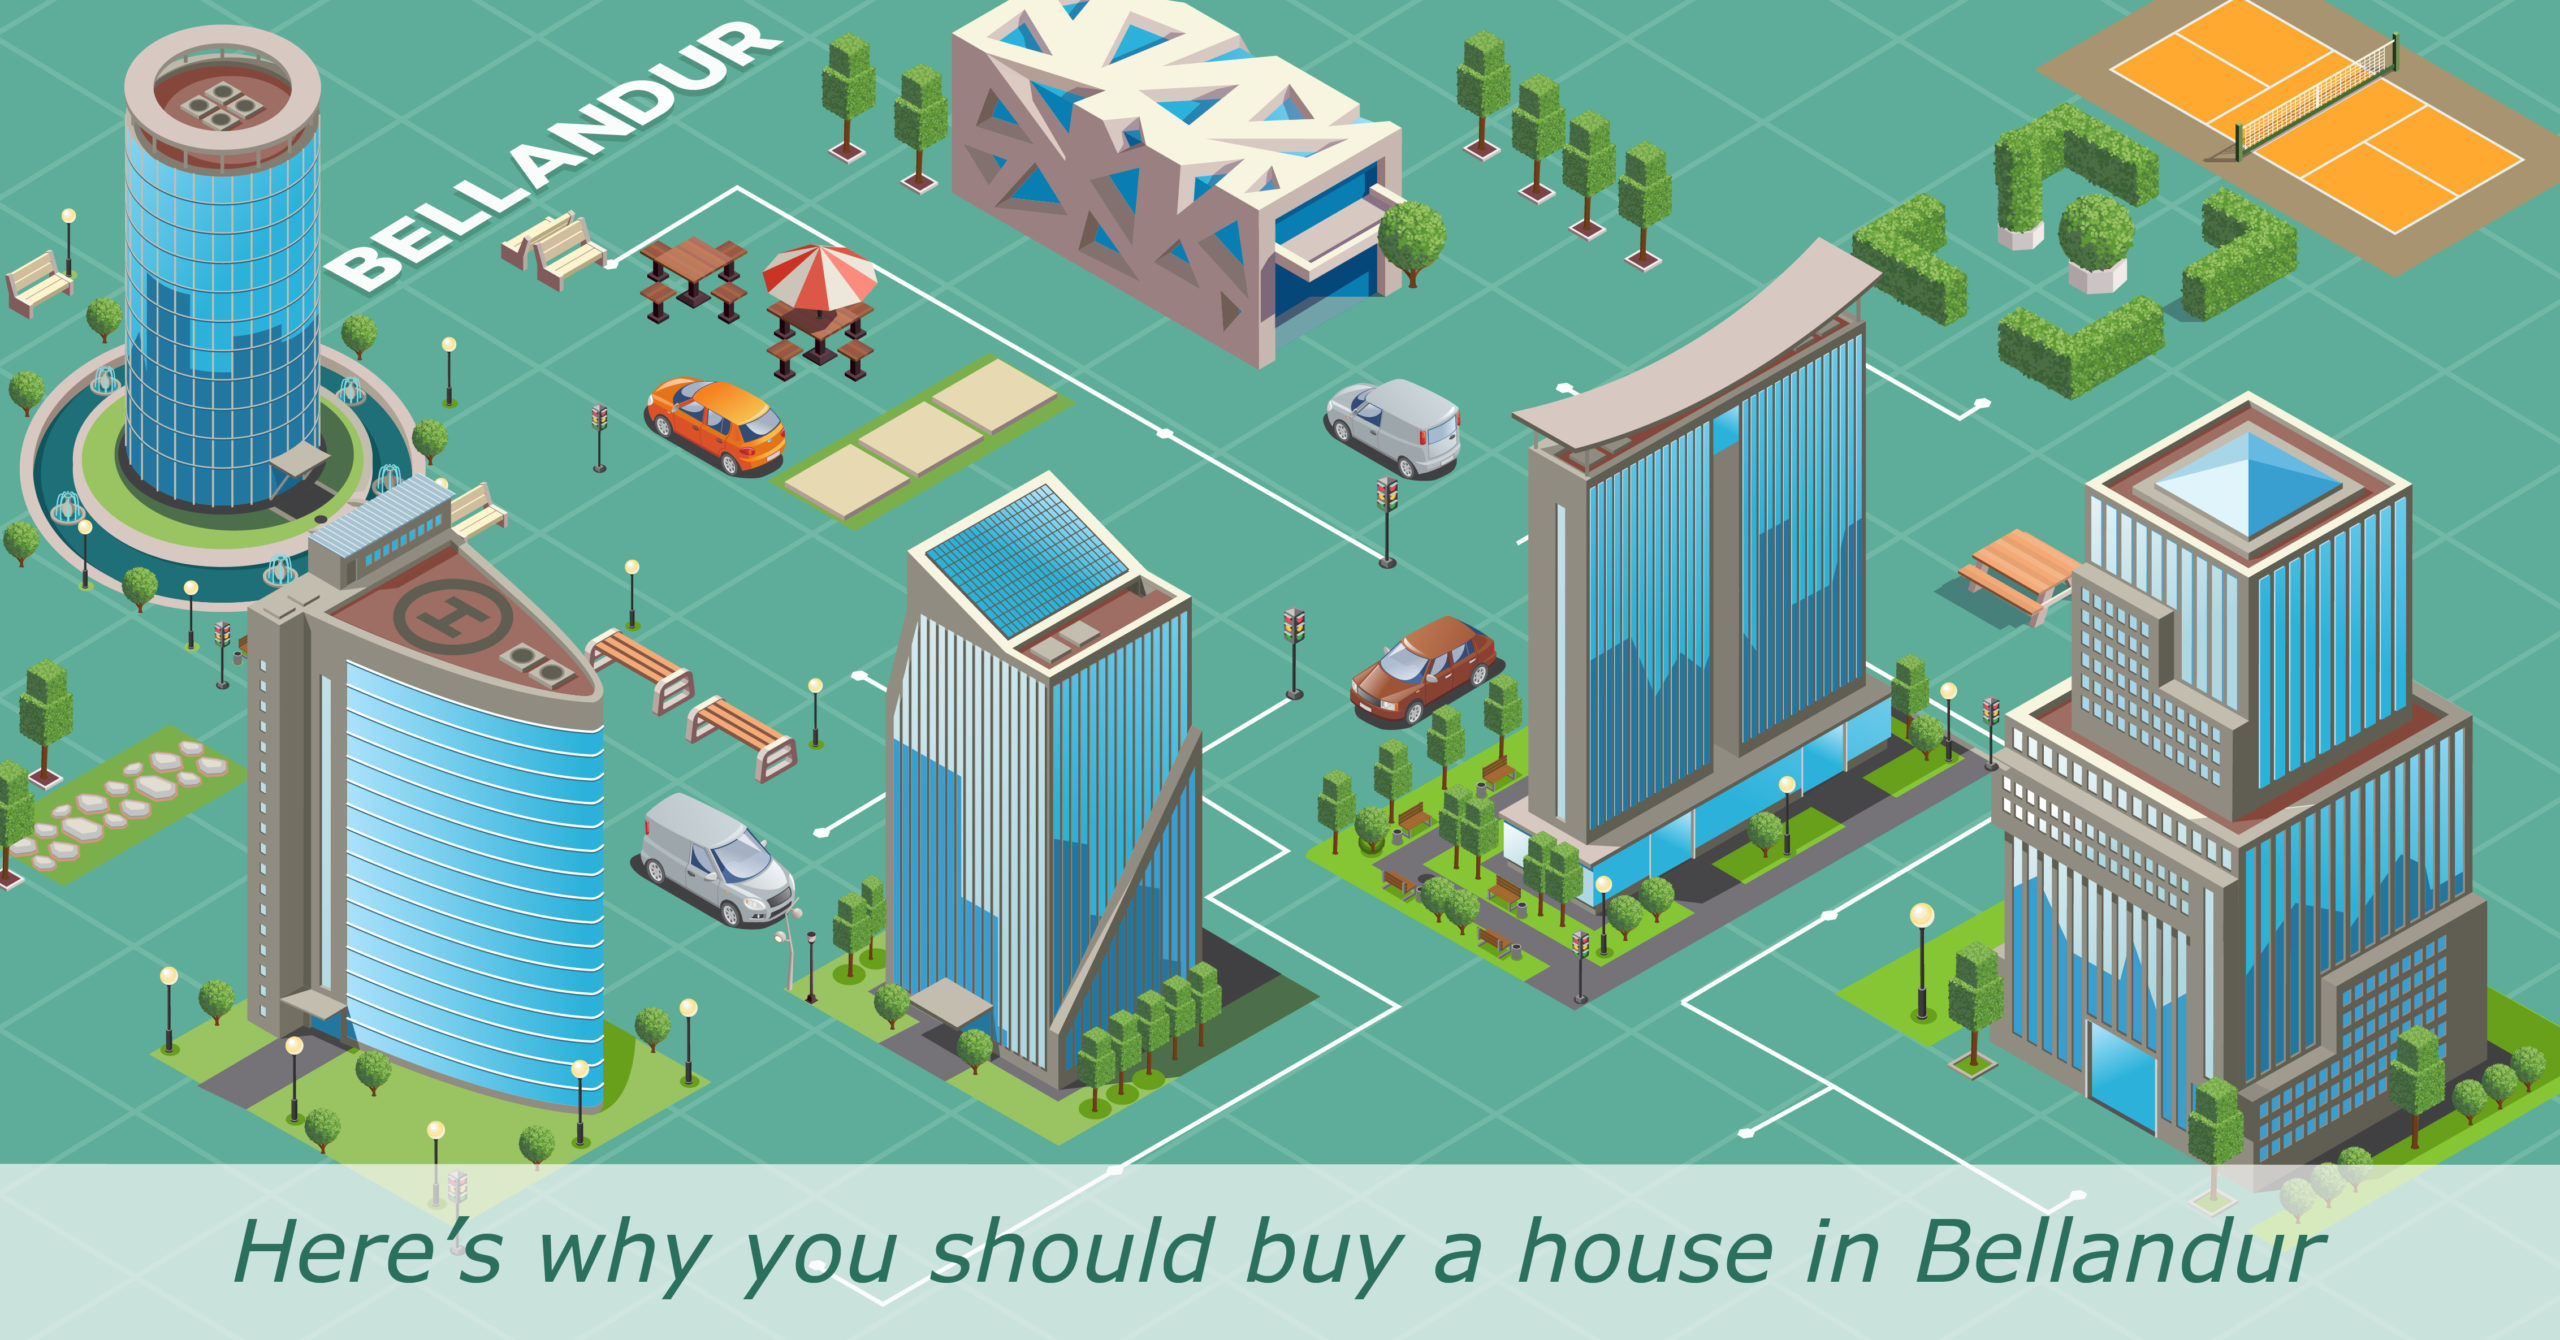 Here’s why you should buy a house in Bellandur